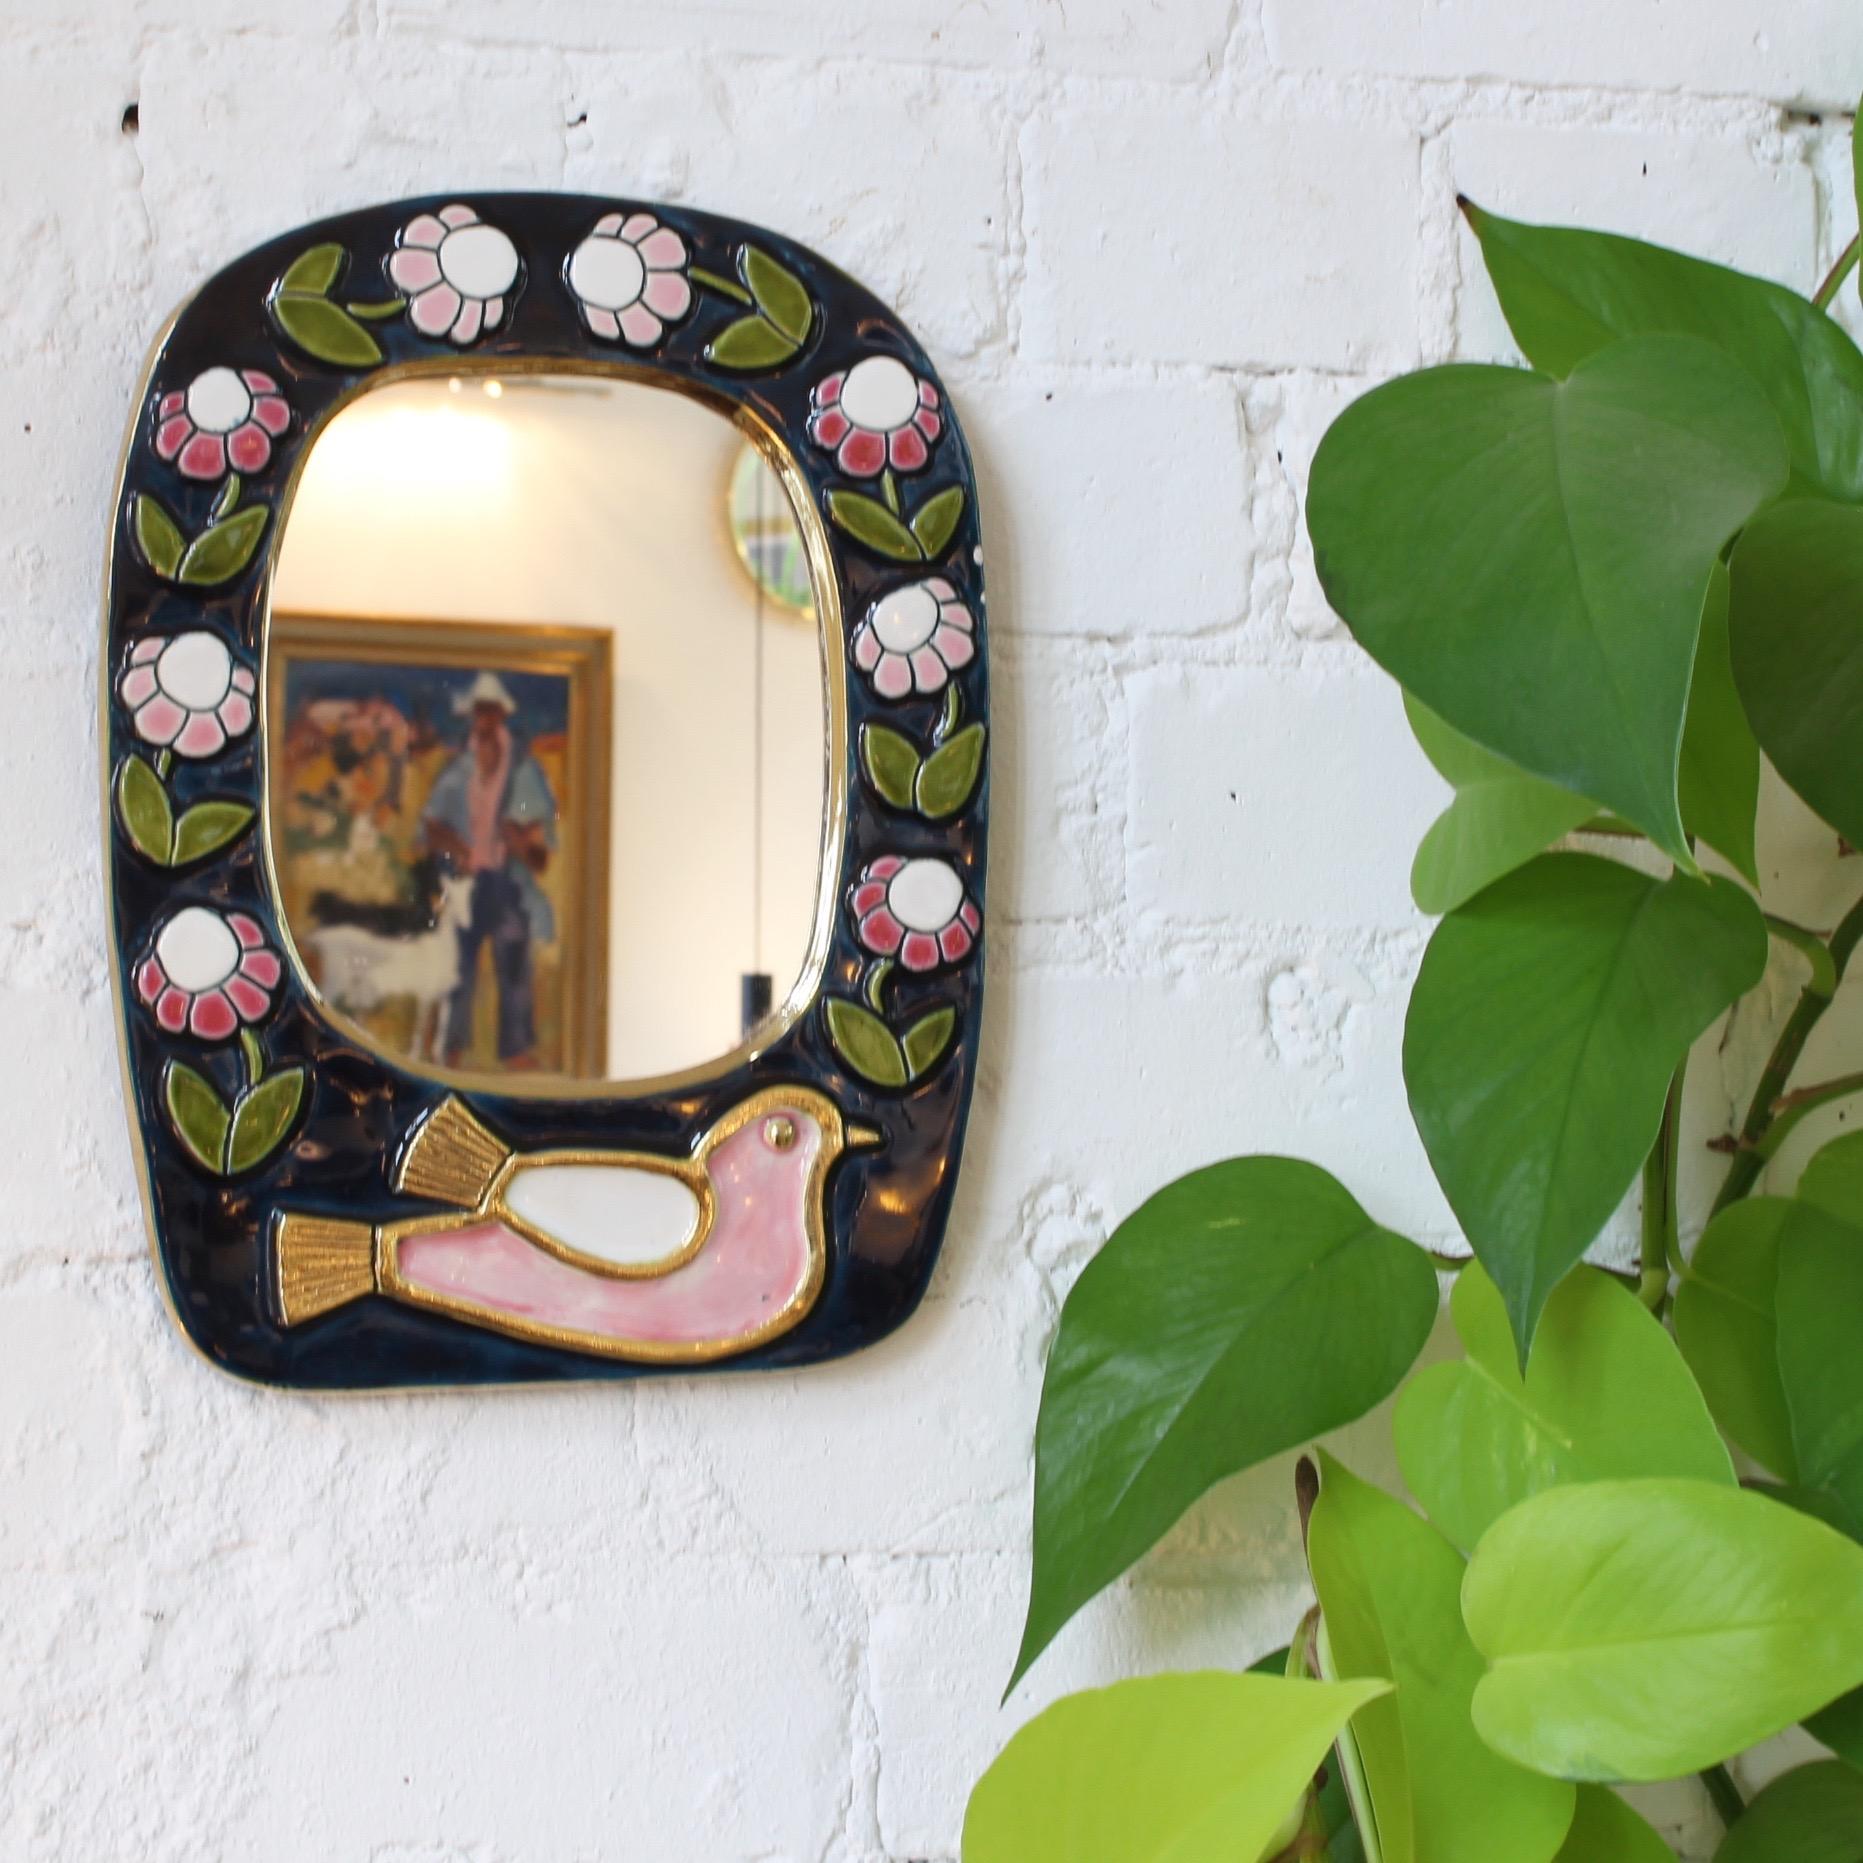 Ceramic wall mirror with enamel glaze, flower motif and stylised bird (circa 1970s) by François Lembo (1930 - 2013). A whimsically decorated wall mirror with gold crackle surround framing a dark blue enamel with pink and red flowers. At the bottom